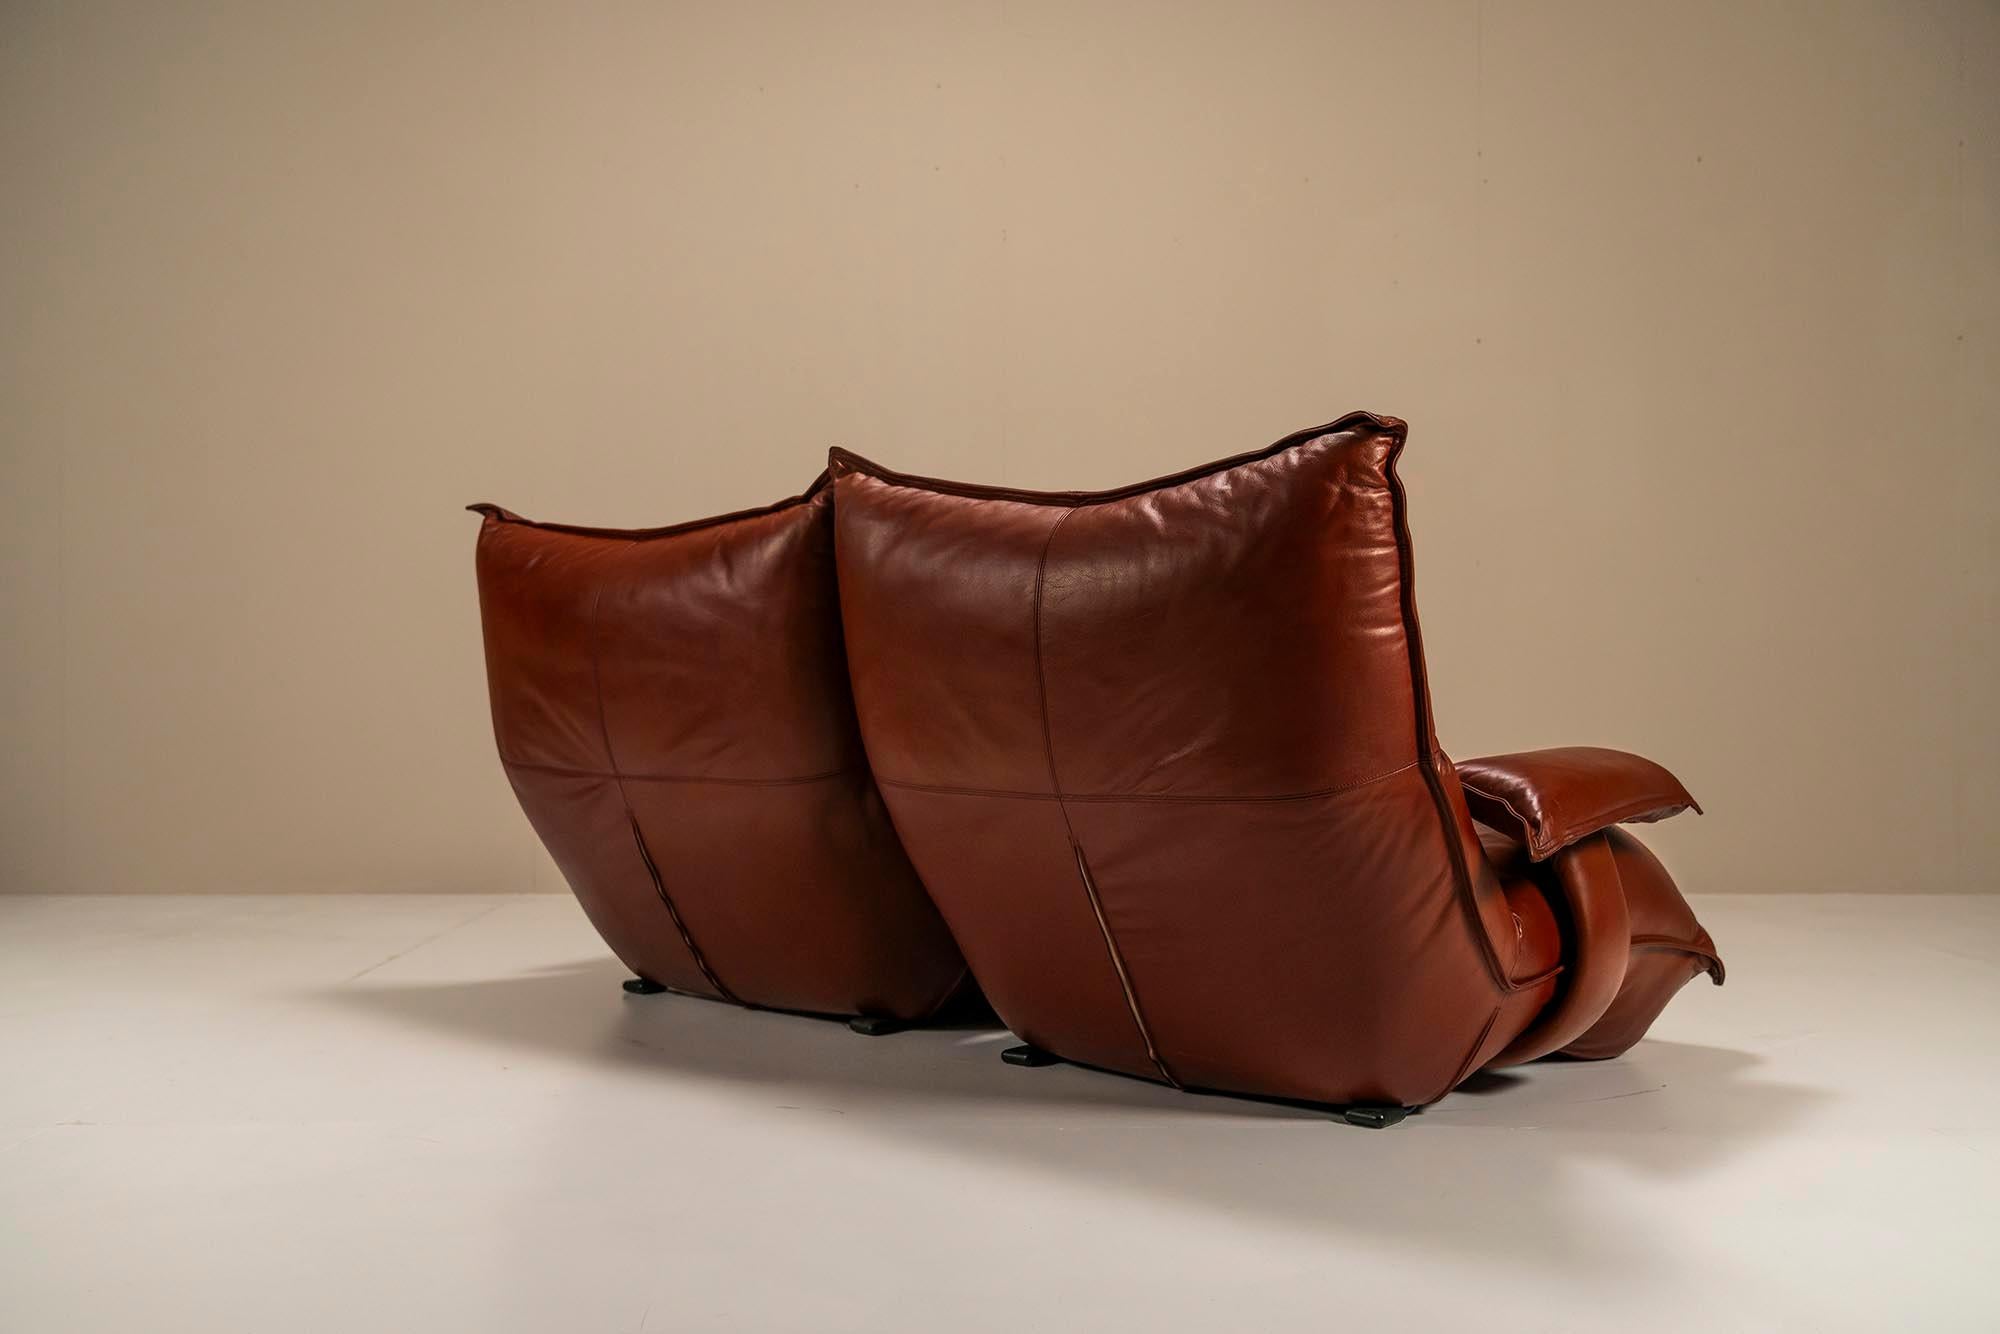 Leather Lounge Chairs Model “Zinzolo” By Vittorio Varo For Plan, Italy 1960s For Sale